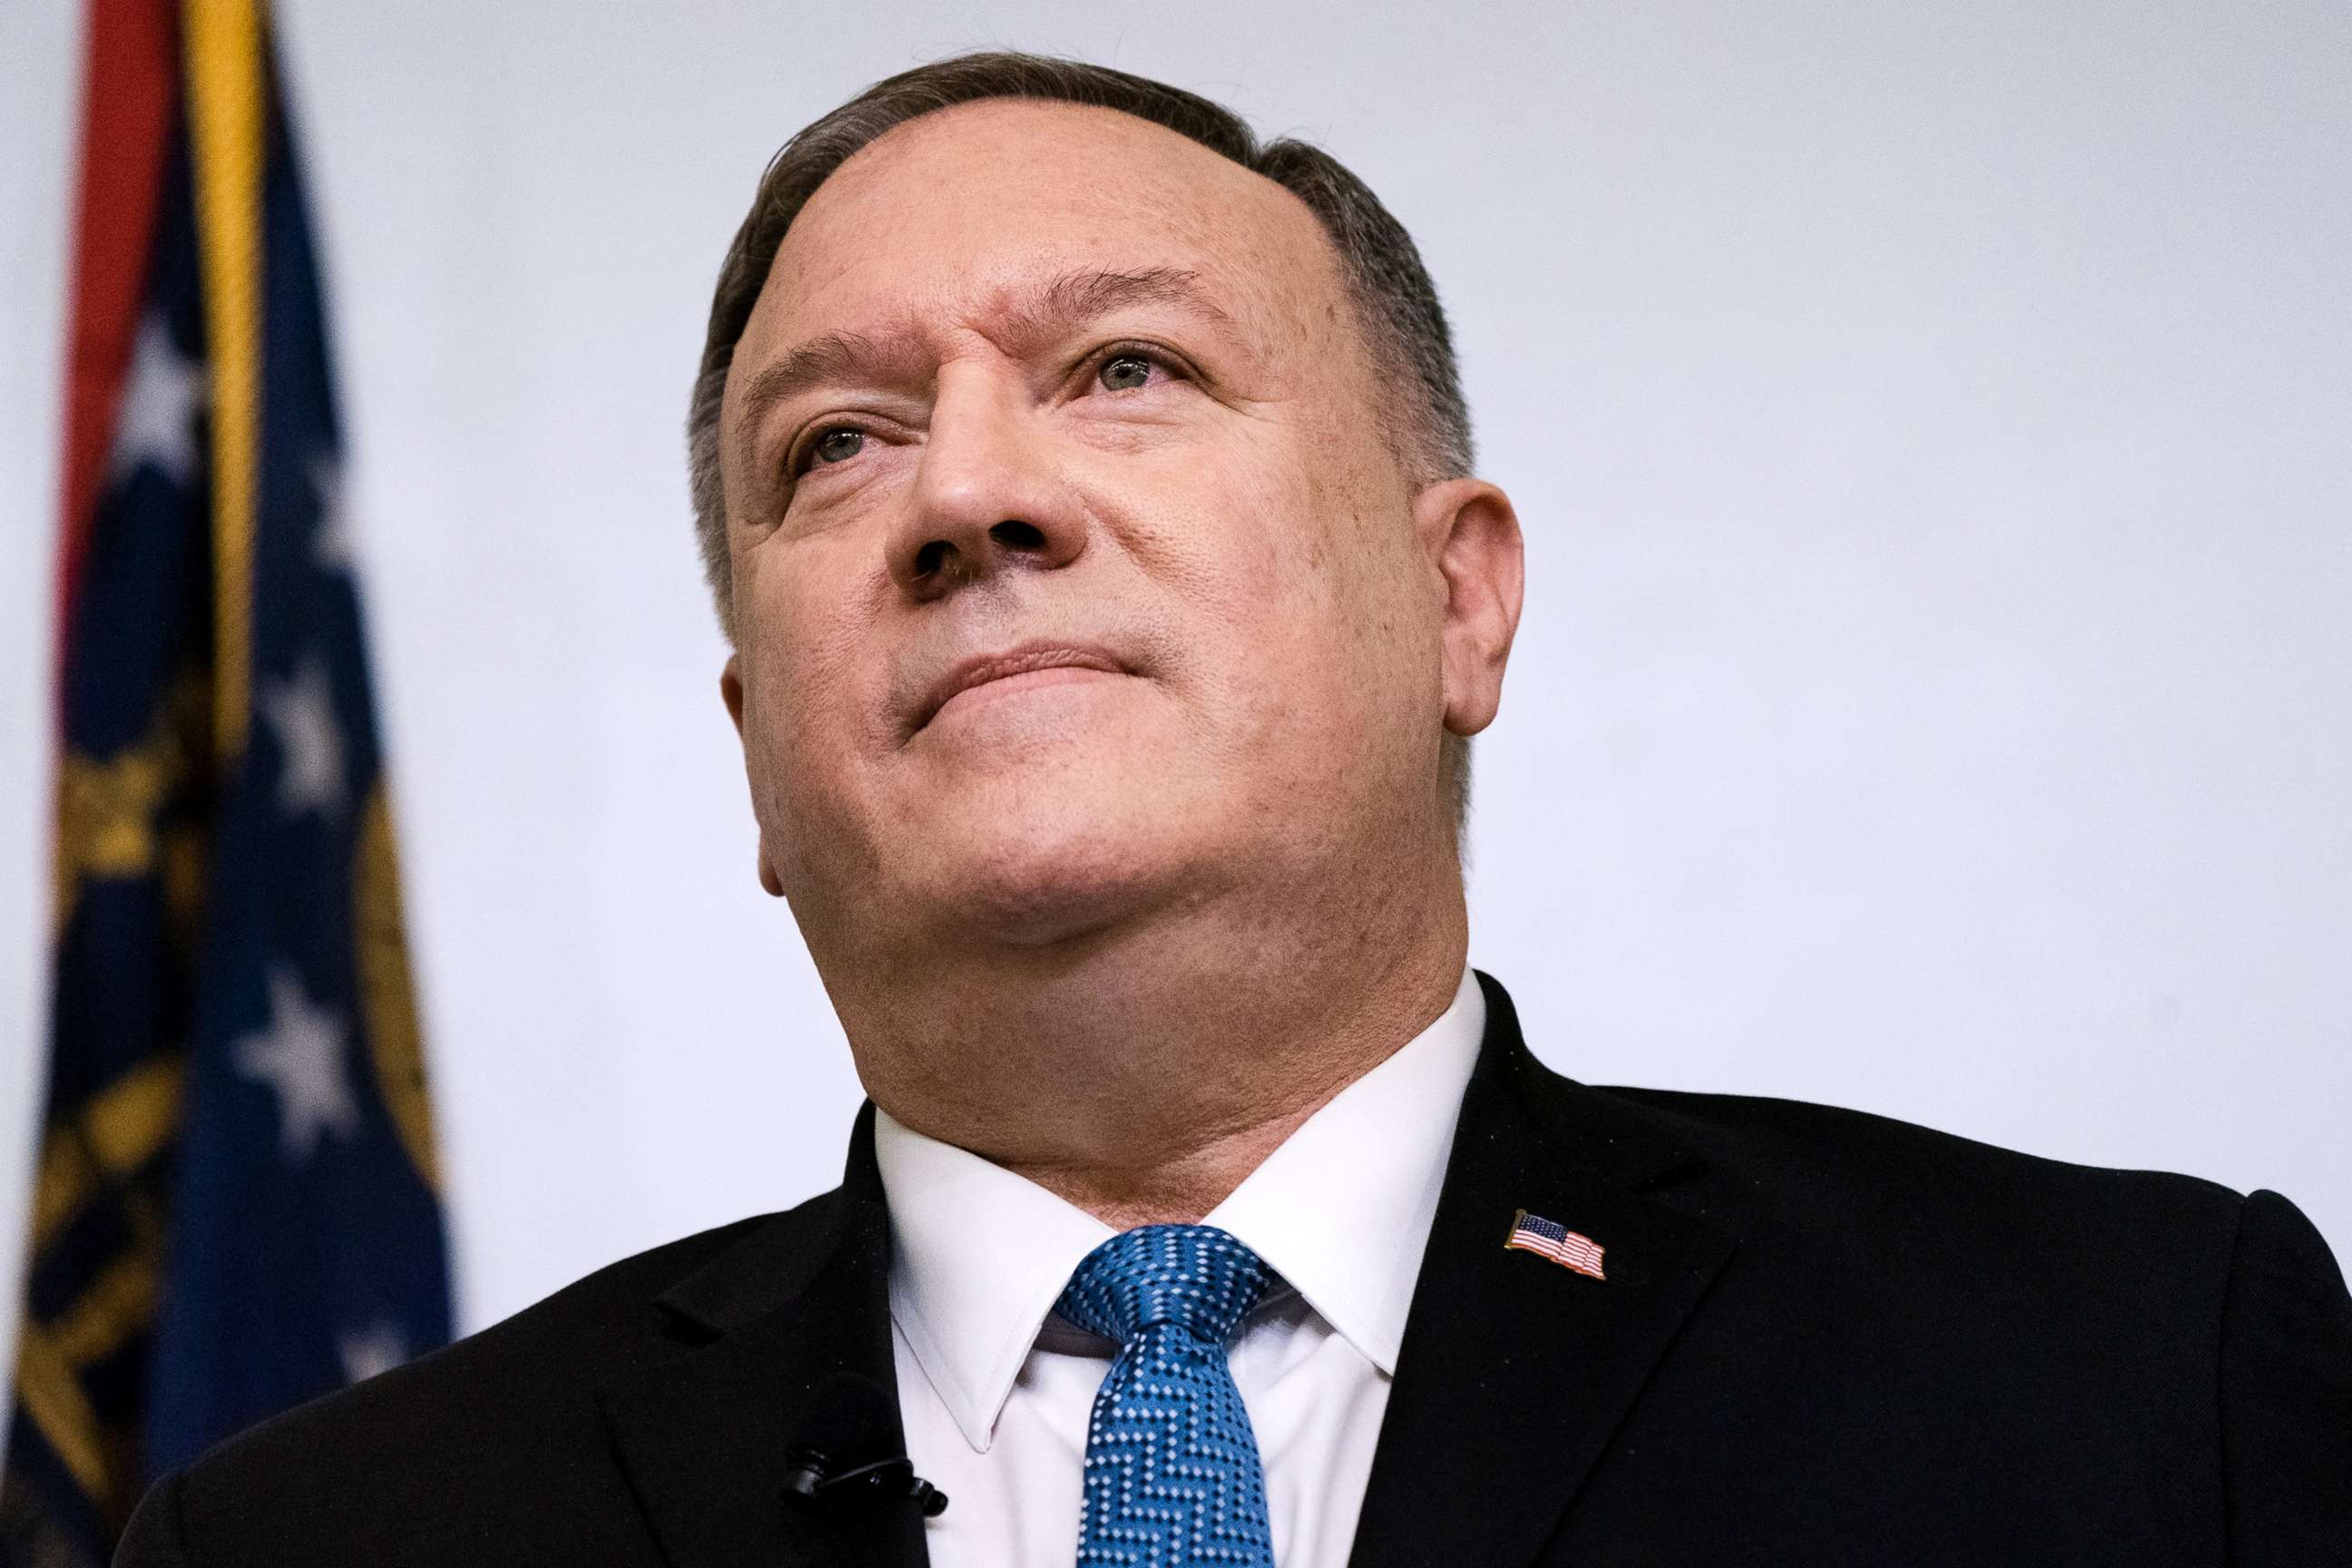 PHOTO: Michael Pompeo, U.S. Secretary of State, pauses while speaking at the Georgia Institute of Technology in Atlanta,, Dec. 9, 2020.